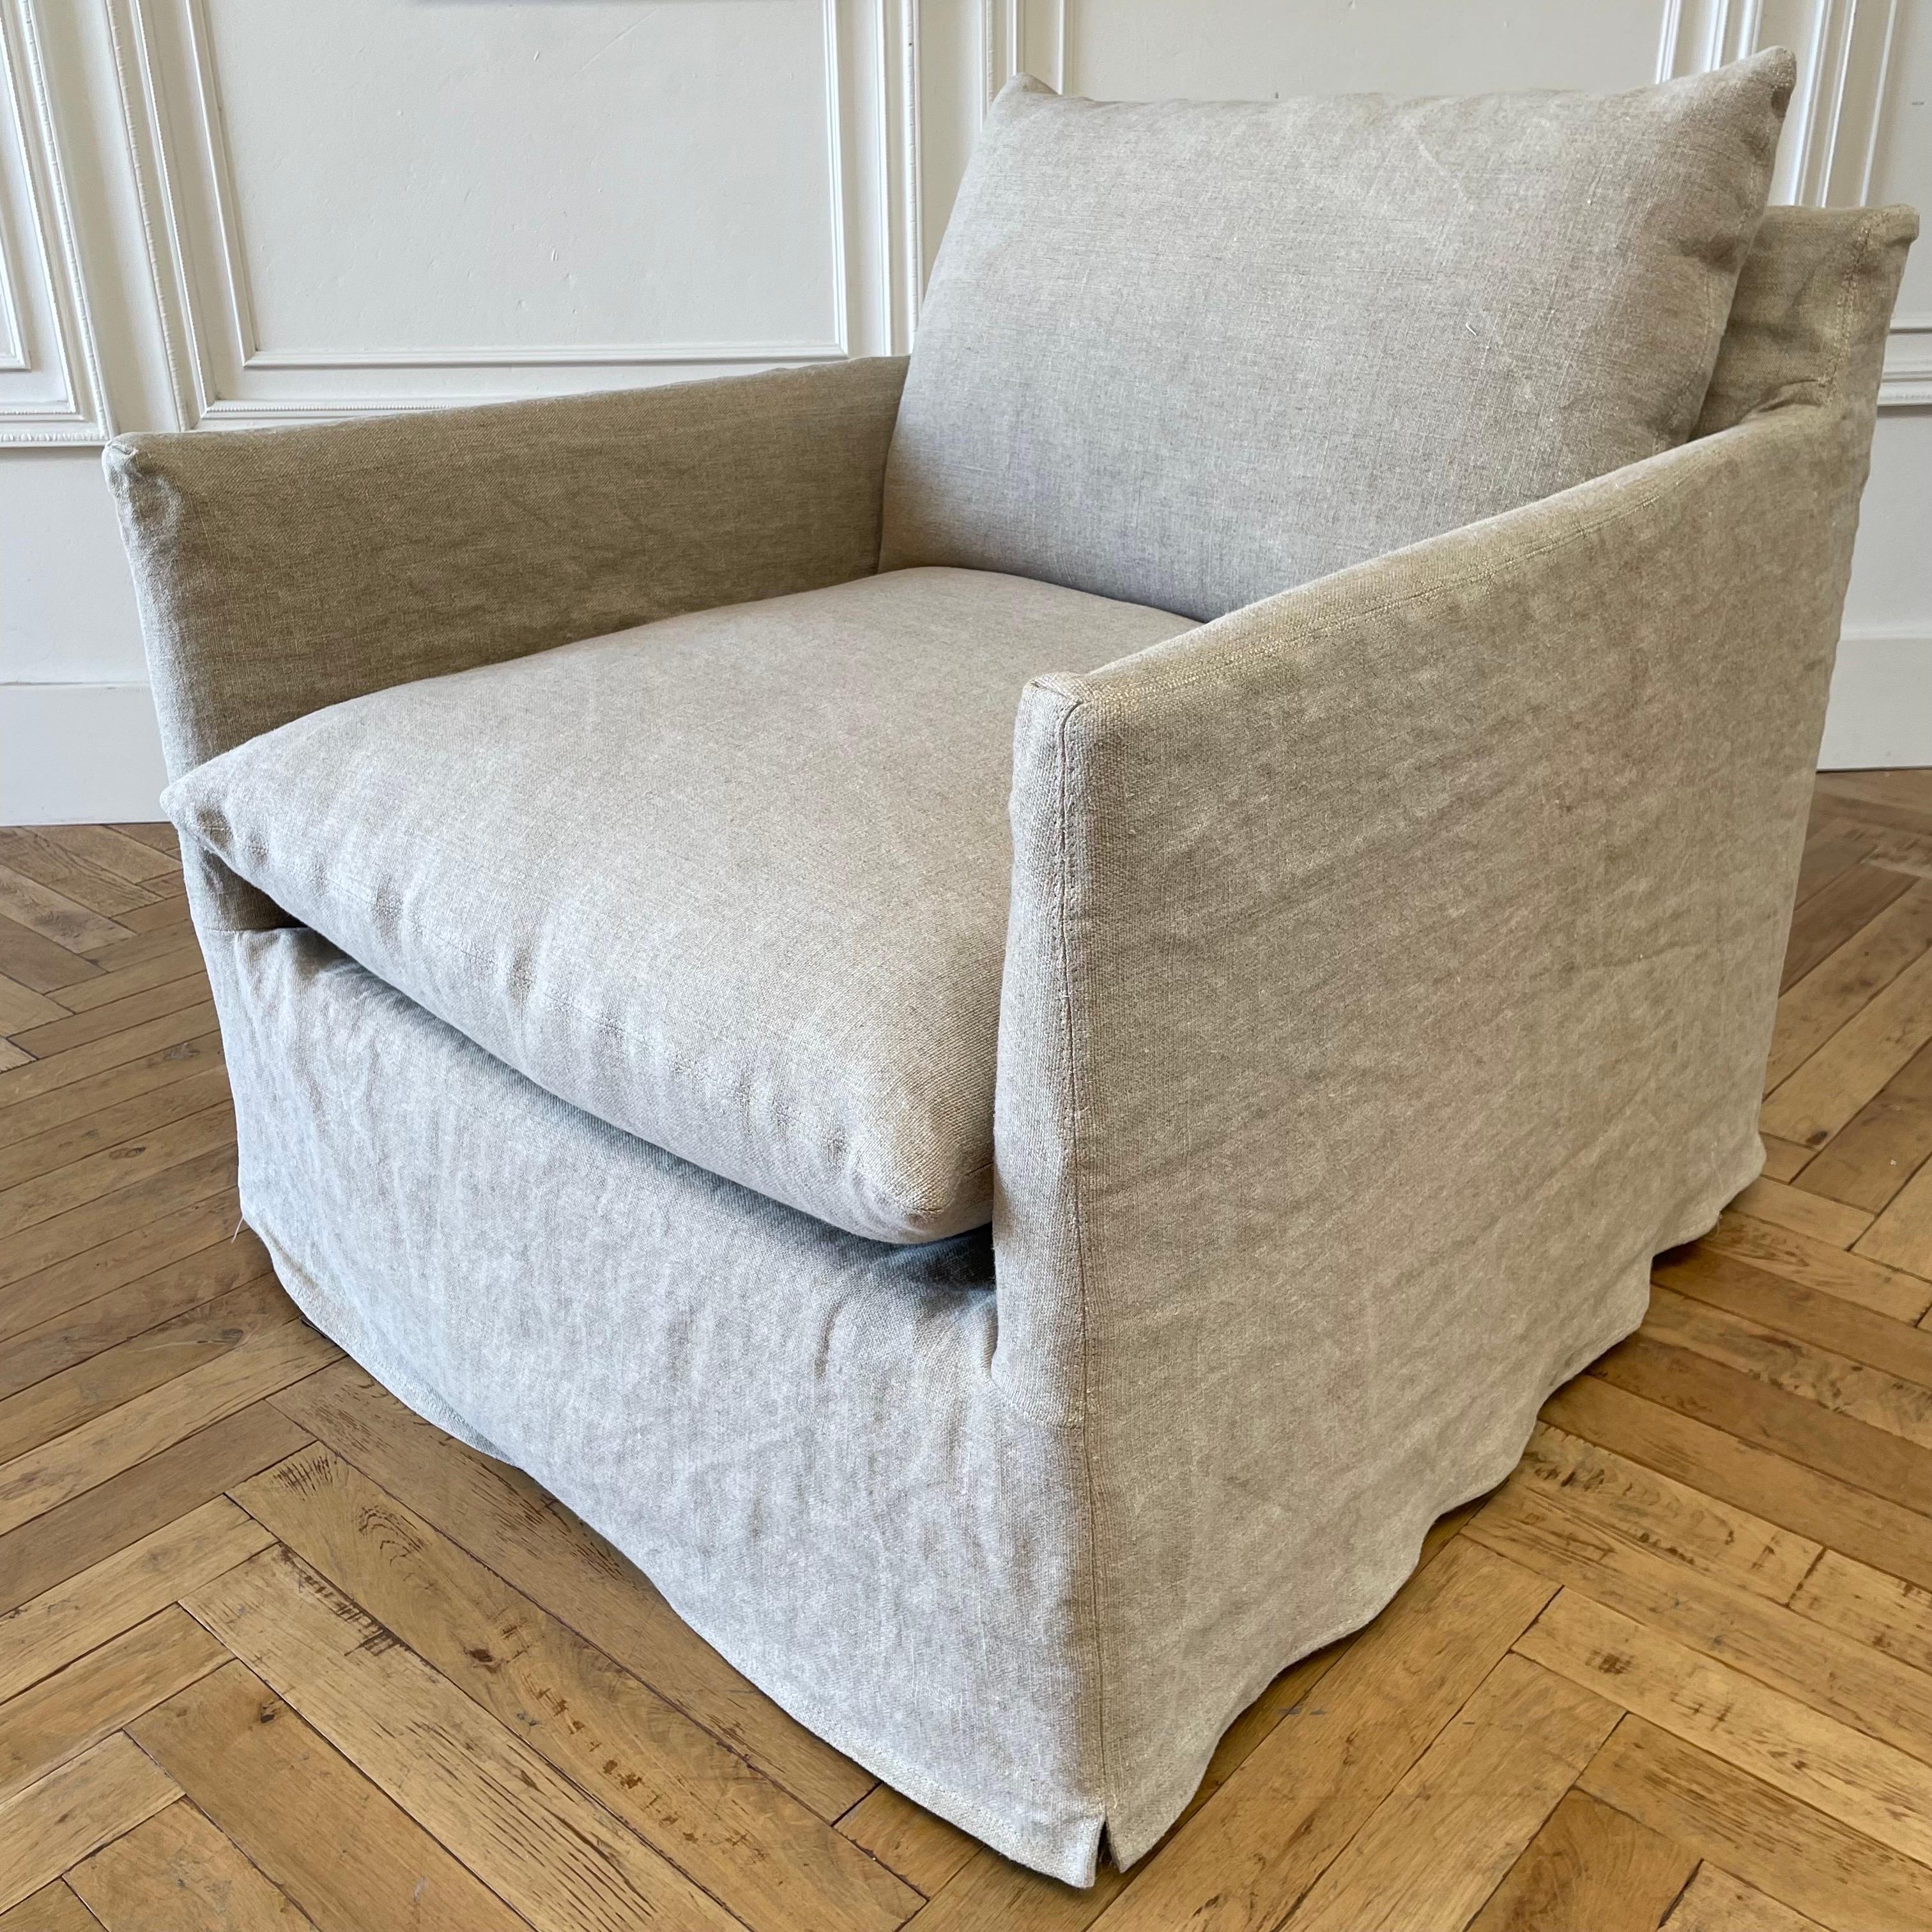 Custom Swivel Chair Slip Covered in a Heavy Flax Stone Washed Linen For Sale 2